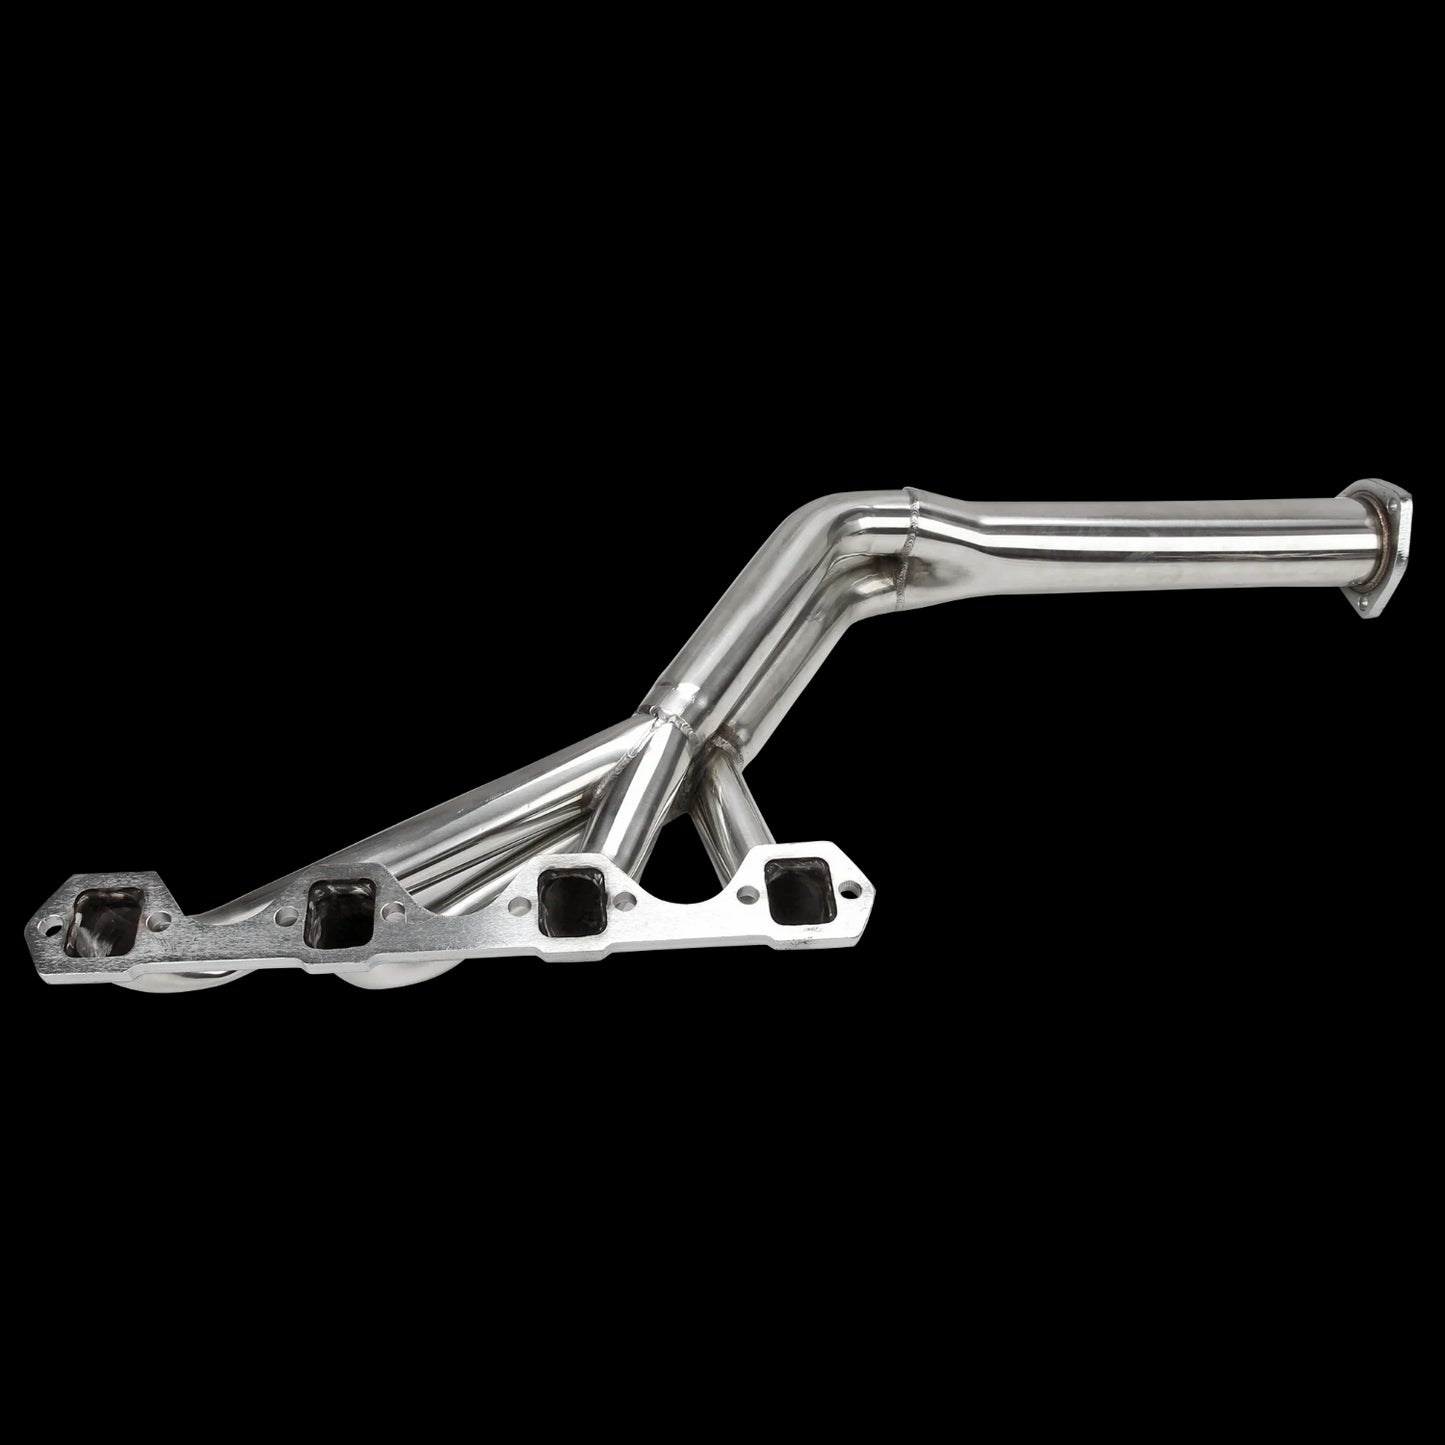 Tri-Y Stainless Exhaust Manifold Headers for Ford Mercury, Mustang, Cougar, 260, 289, 302,